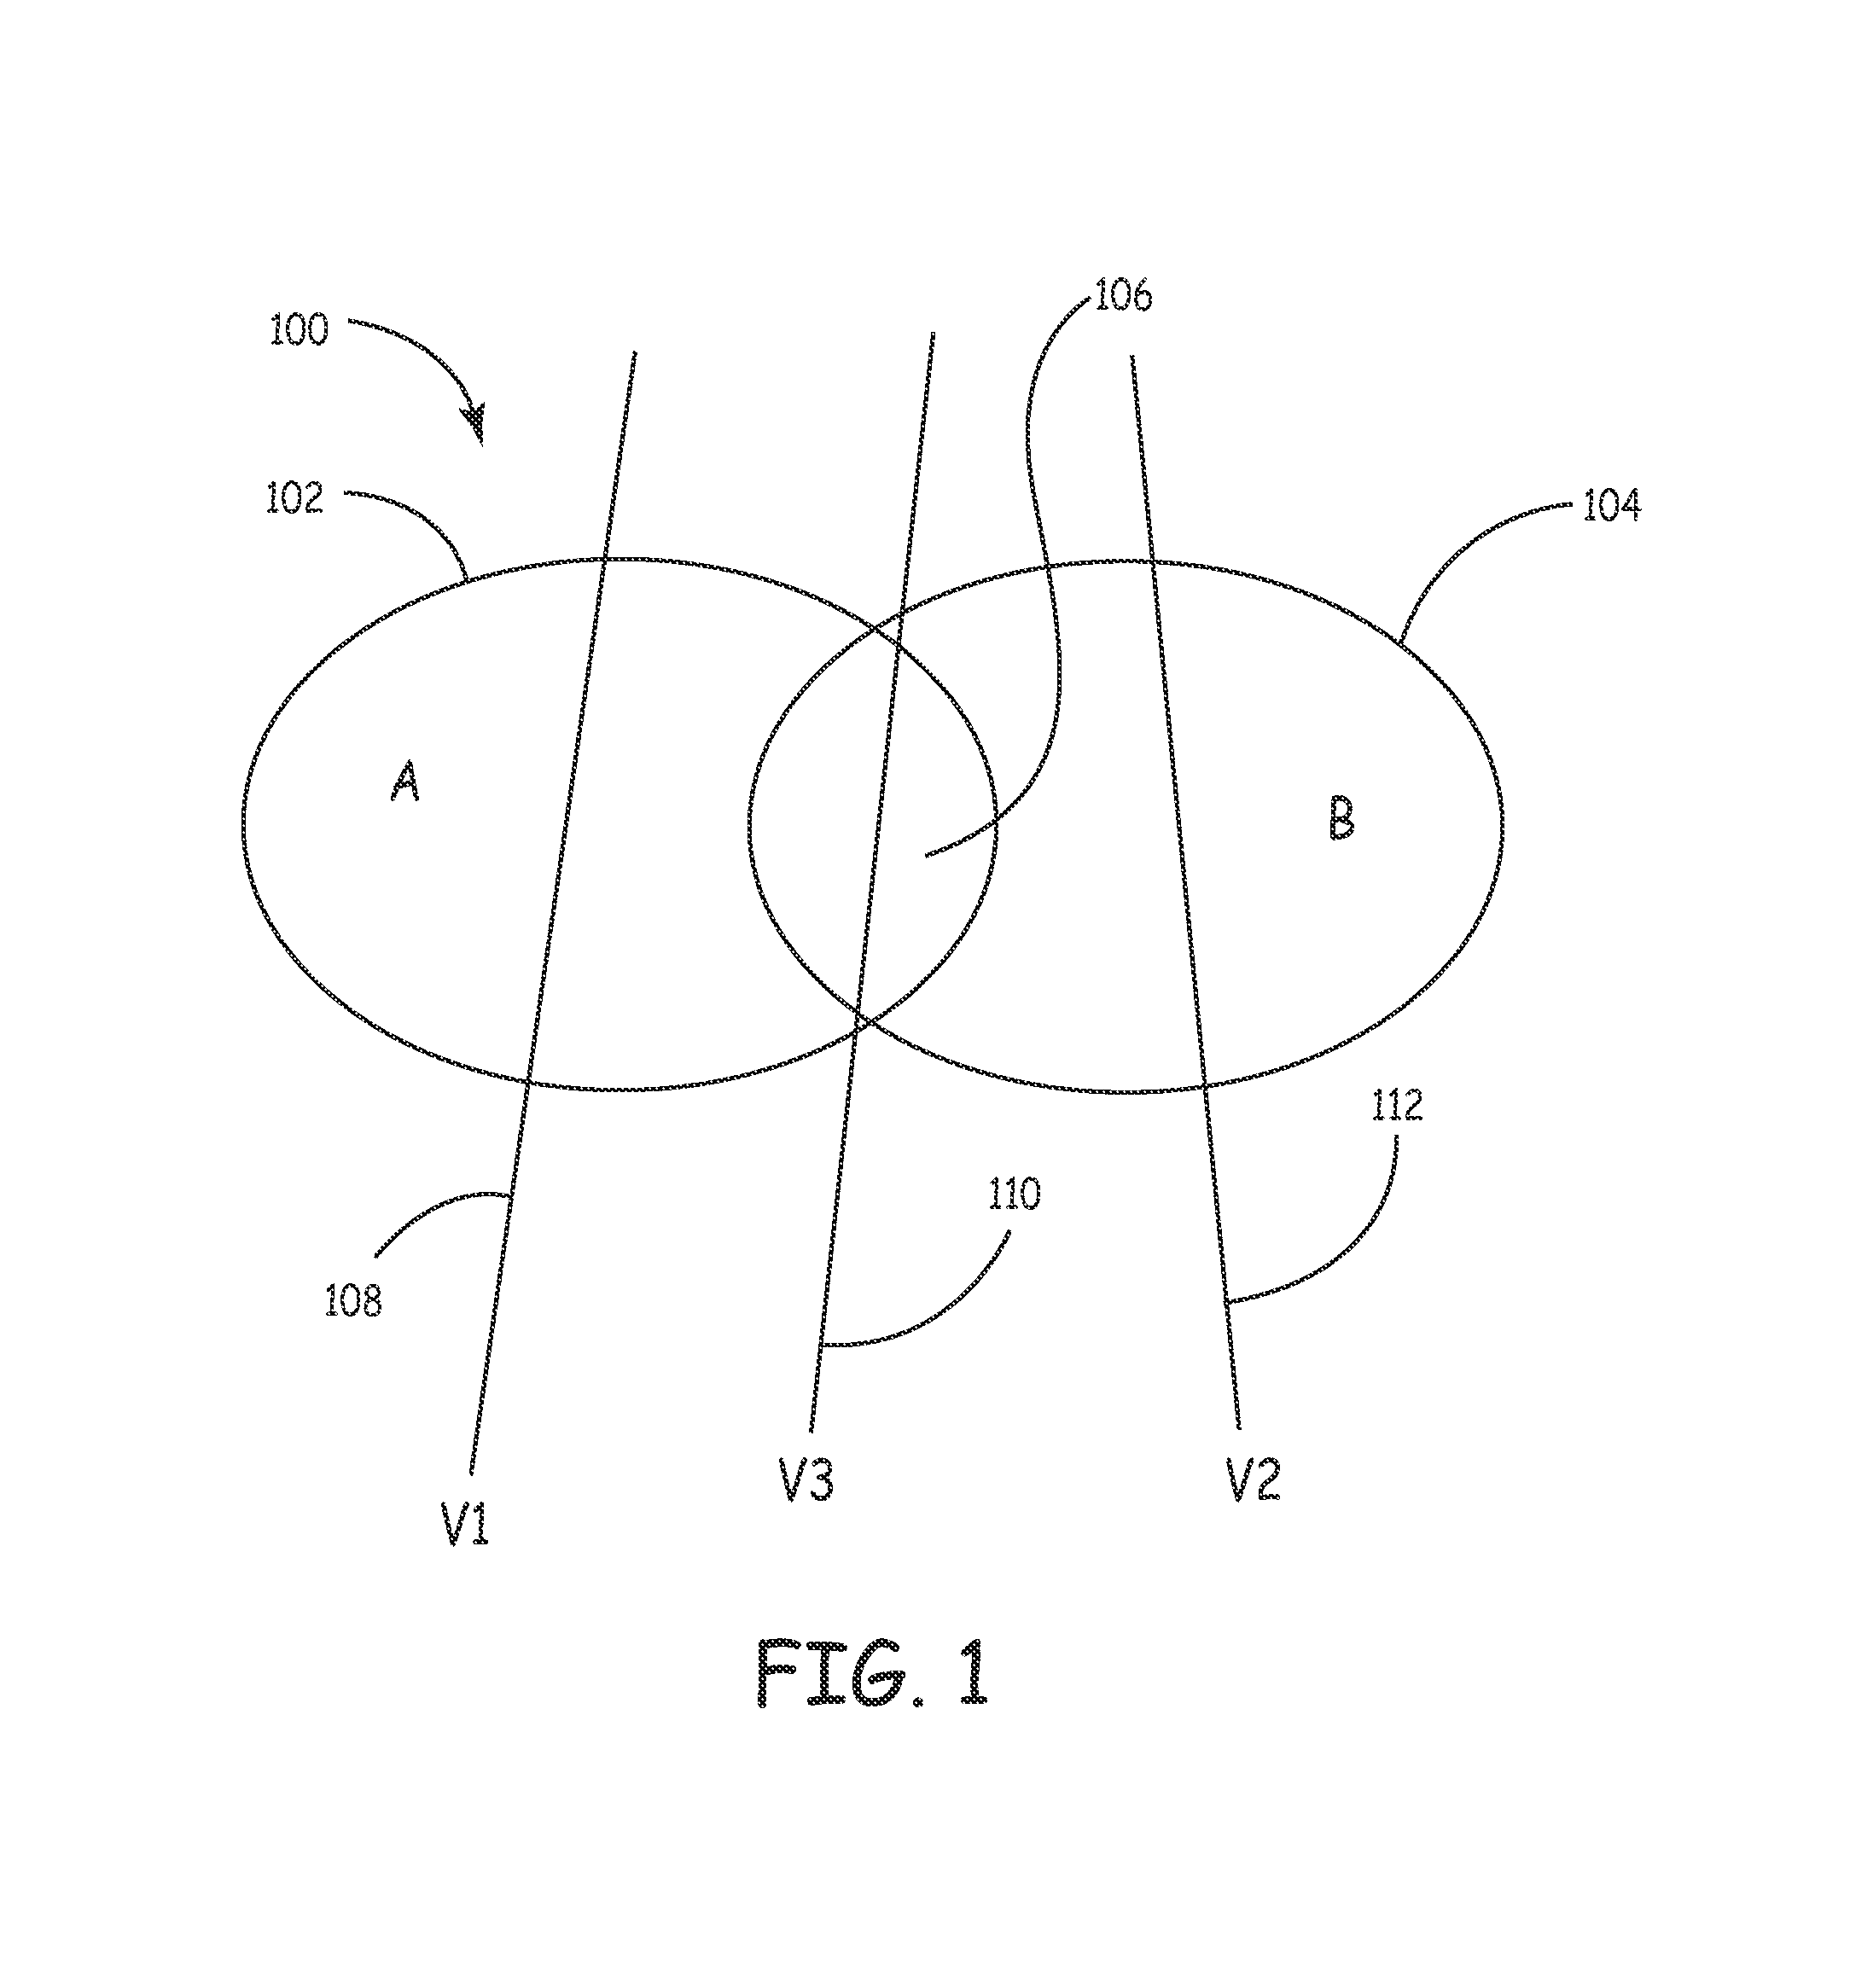 Method and apparatus for impedance signal localizations from implanted devices